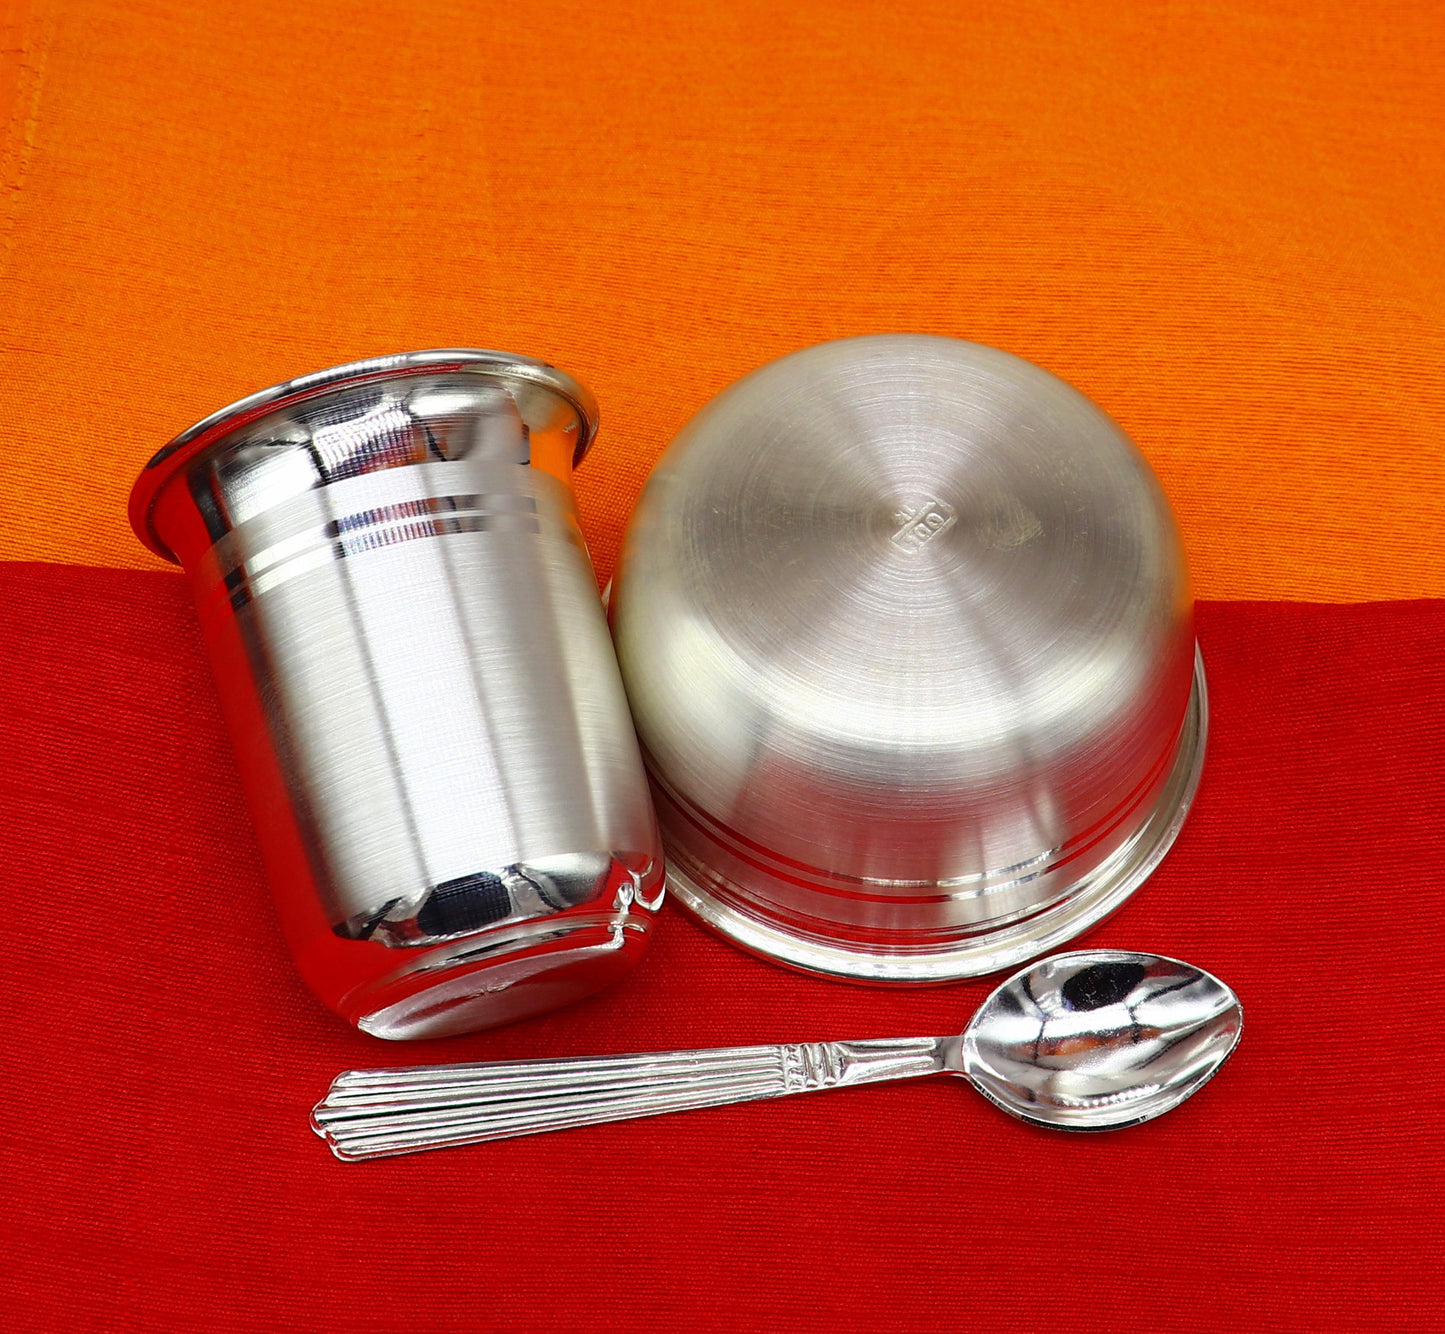 999 fine silver water milk glass and bowl, silver tumbler silver spoon, silver utensils, silver baby set serving food utensils sv200 - TRIBAL ORNAMENTS